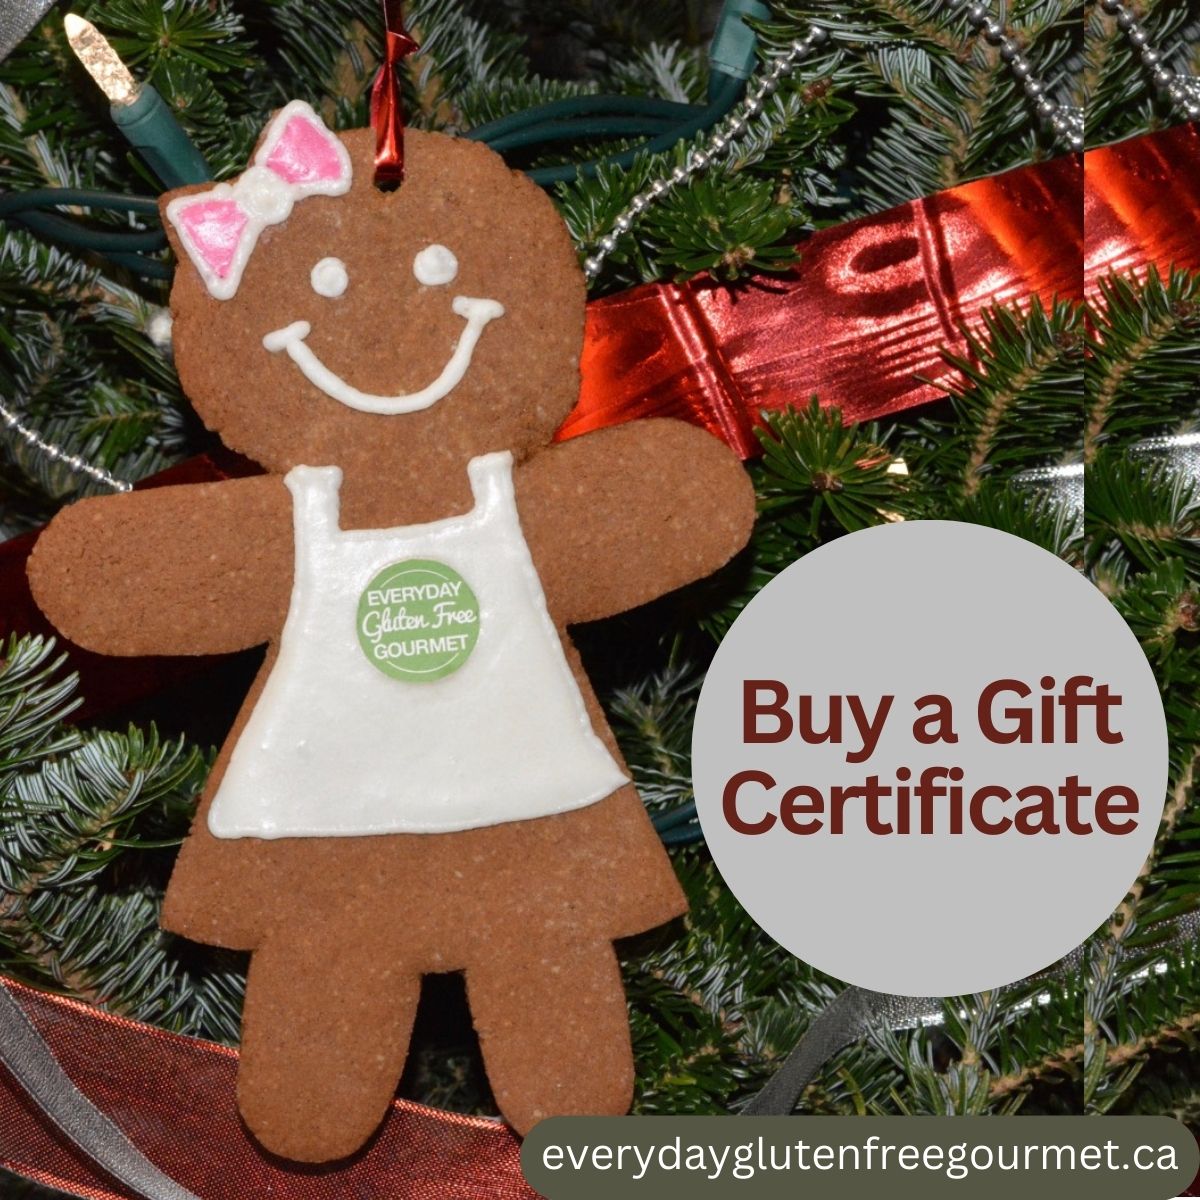 A gingerbread lady cookie wearing a white icing apron hanging on a Christmas tree beside a silver ornament saying Buy a Gift Certificate.